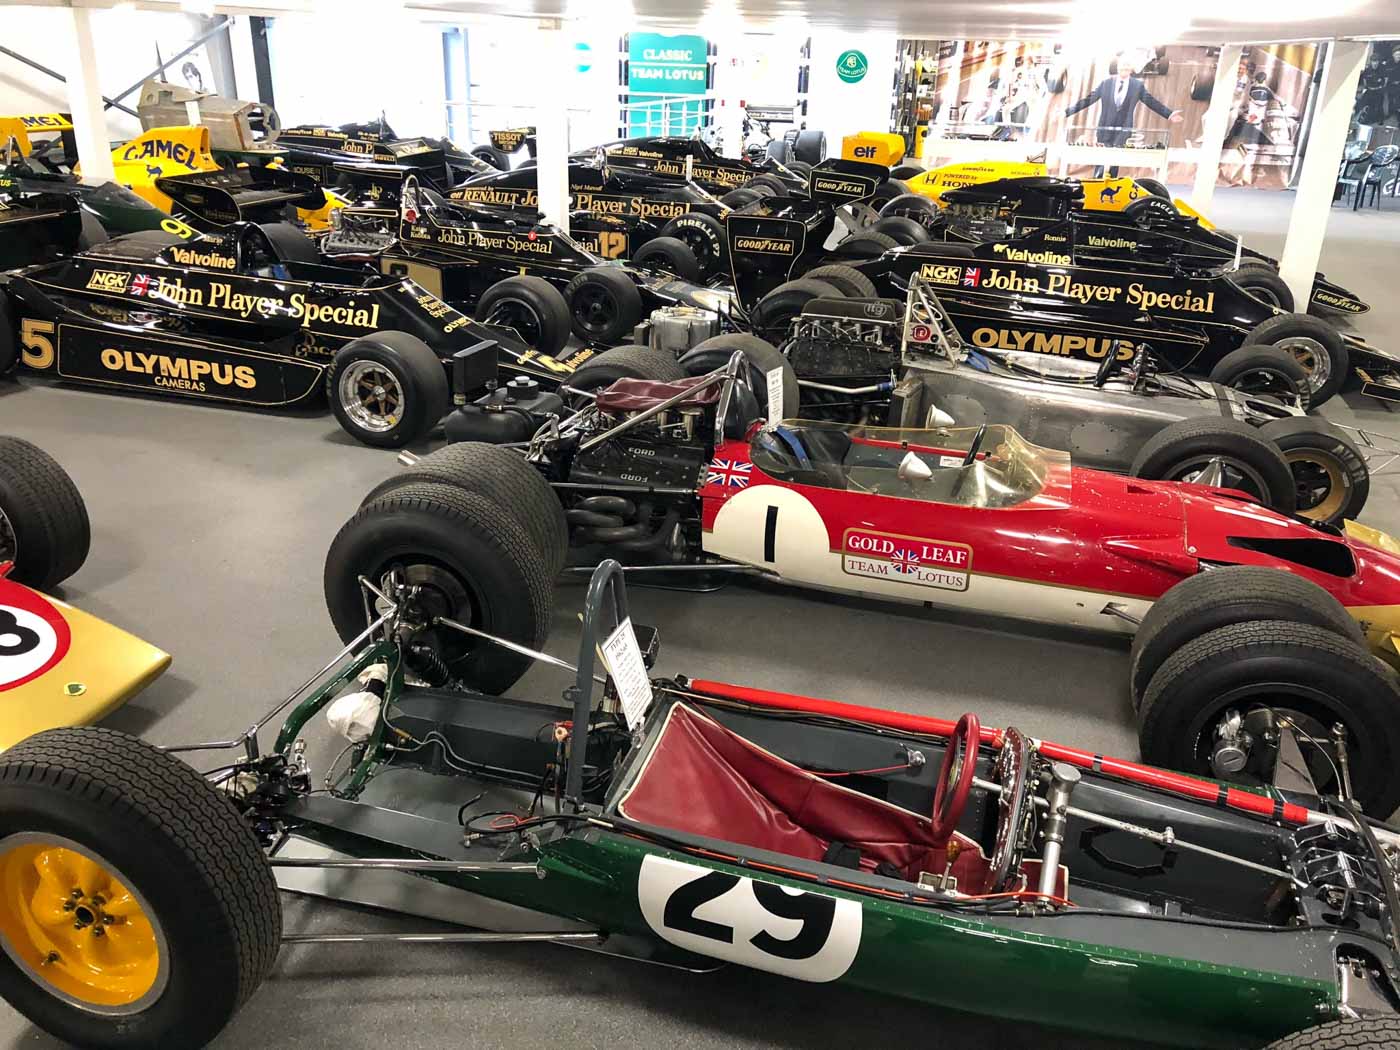 Classic Team Lotus - so many cars, so little time!